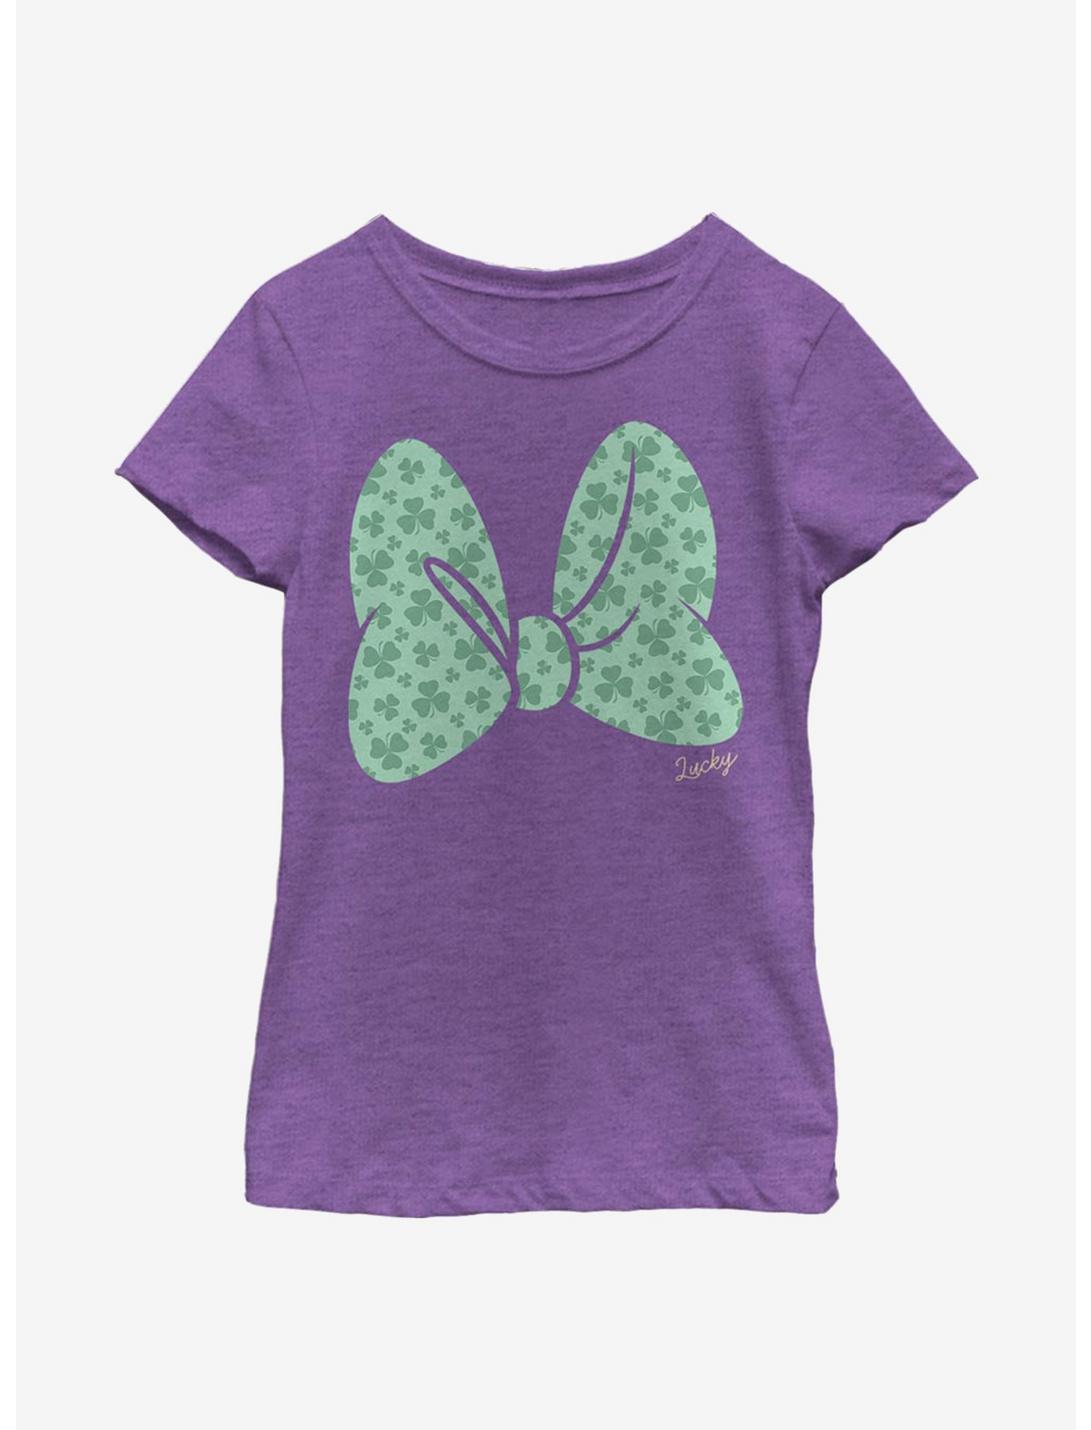 Disney Minnie Mouse Clover Bow Youth Girls T-Shirt, PURPLE BERRY, hi-res